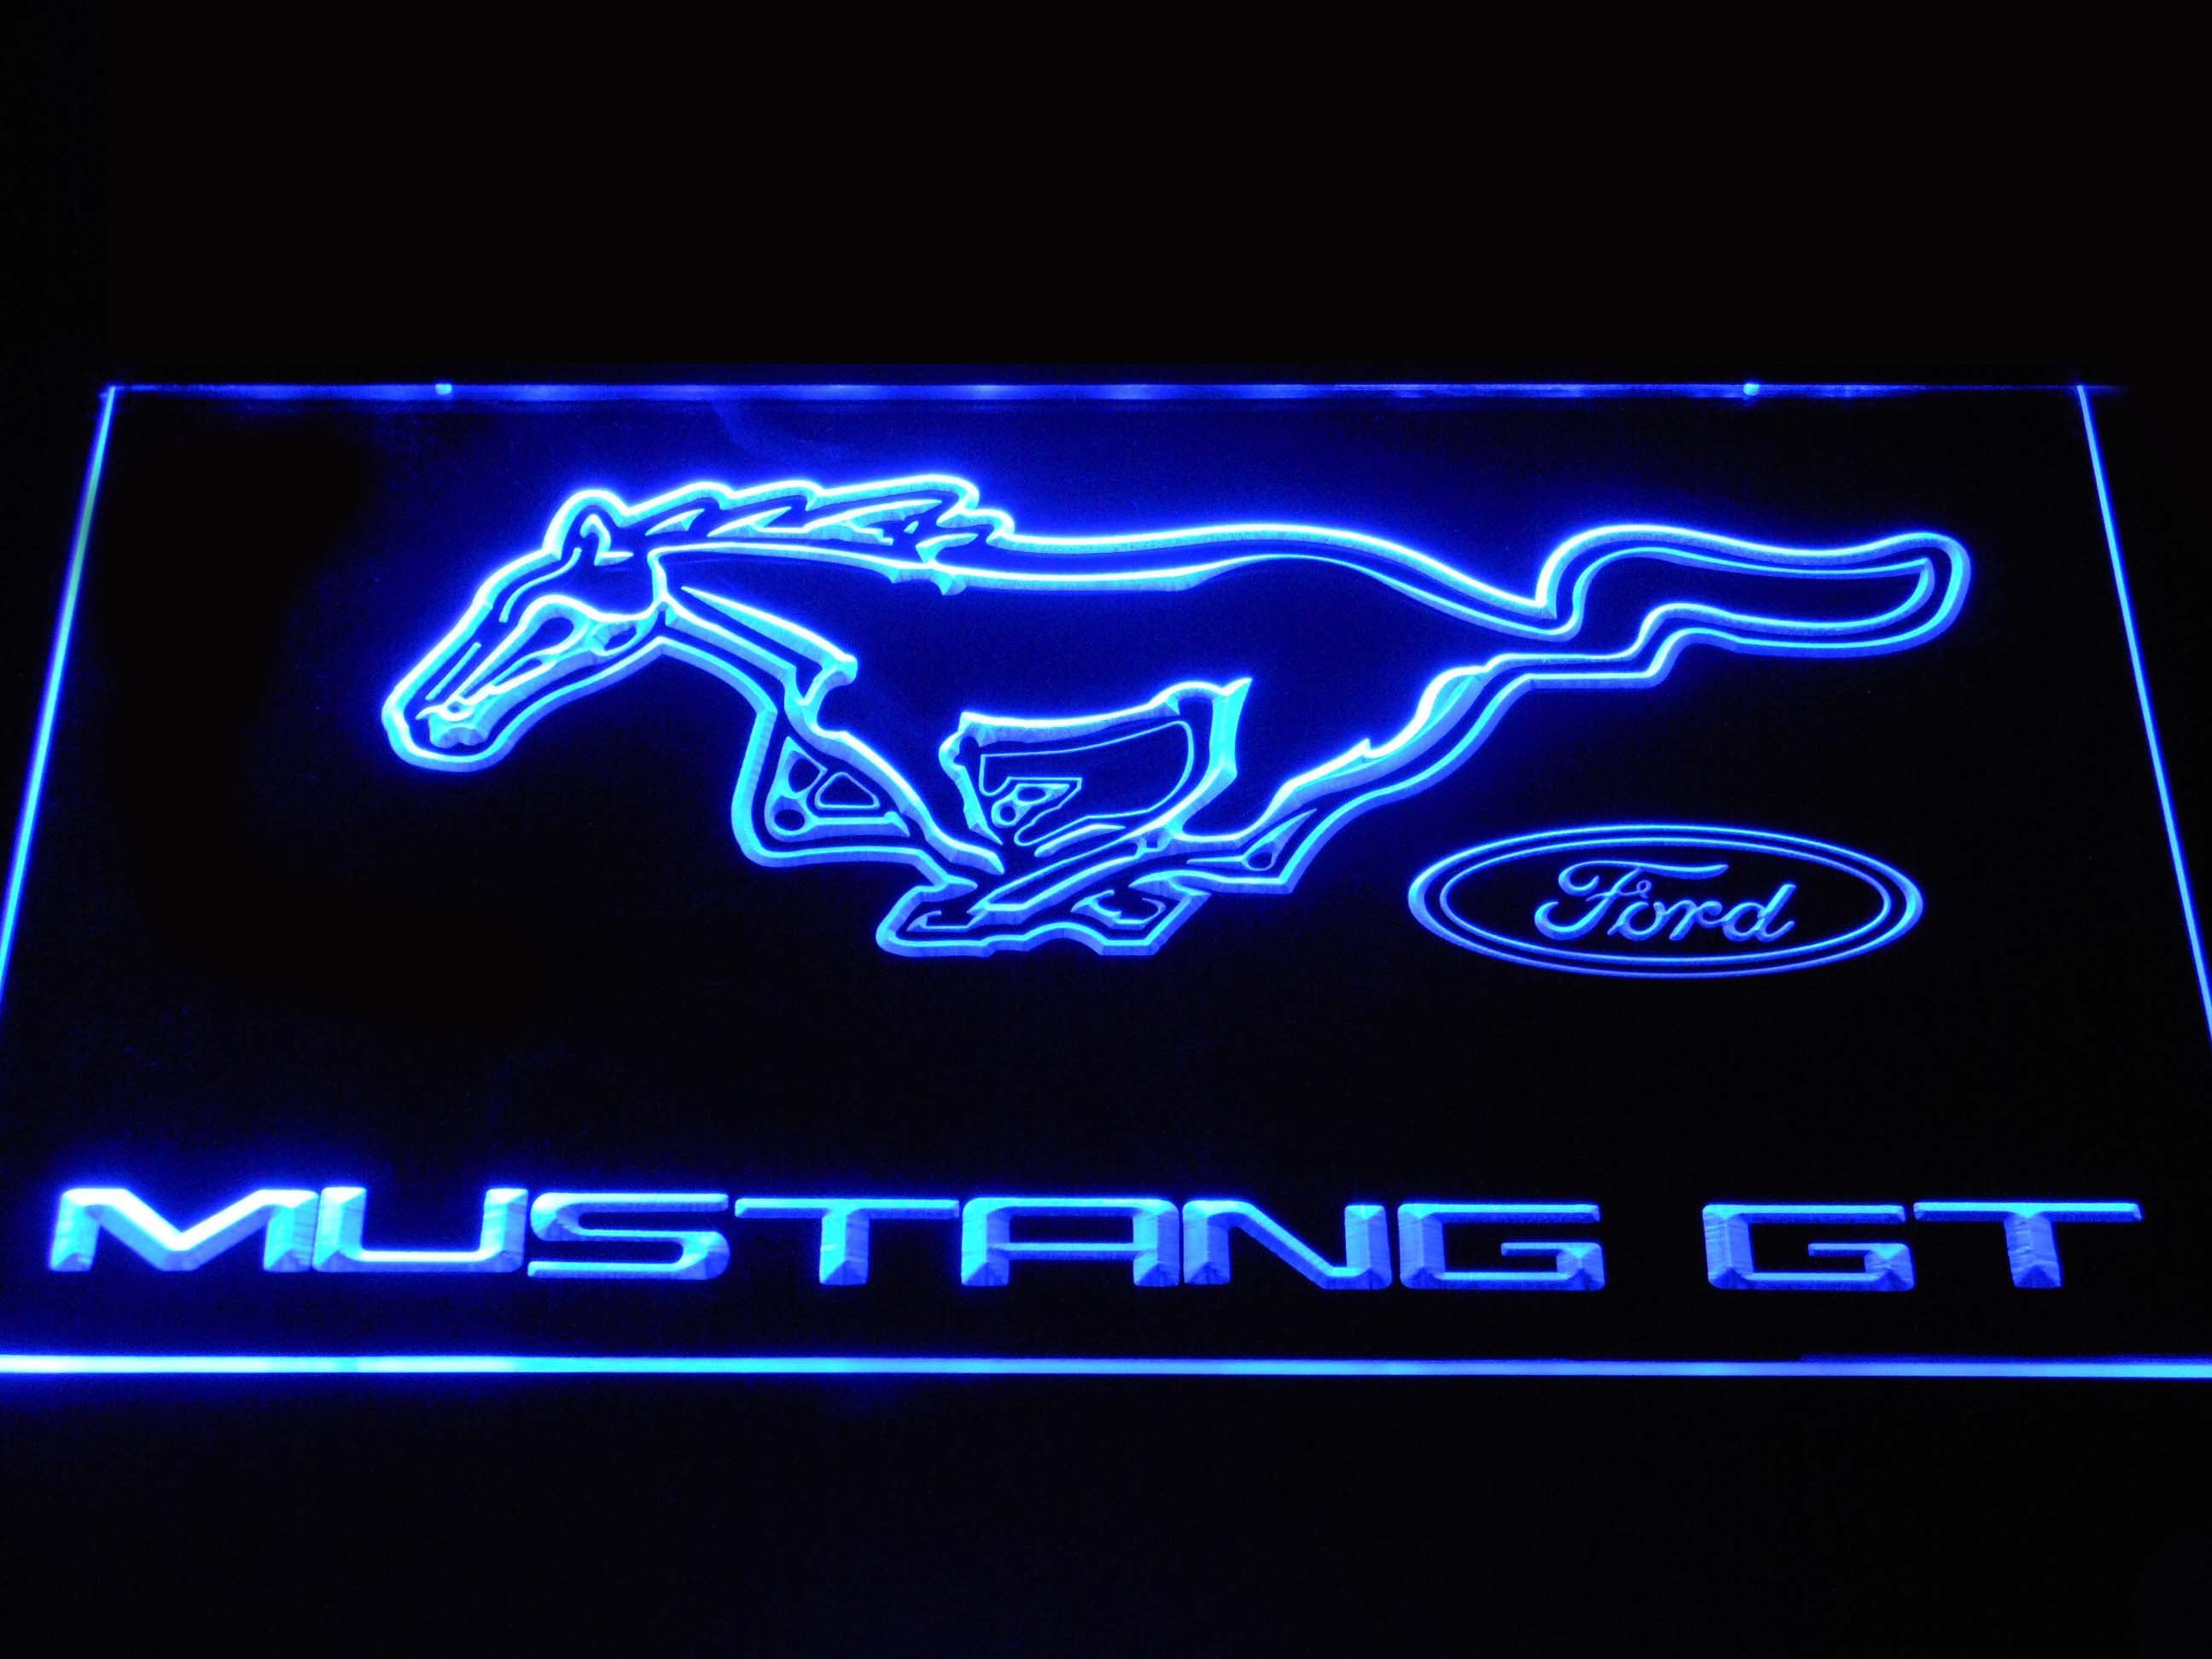 Fords Mustangs GT Neon Sign